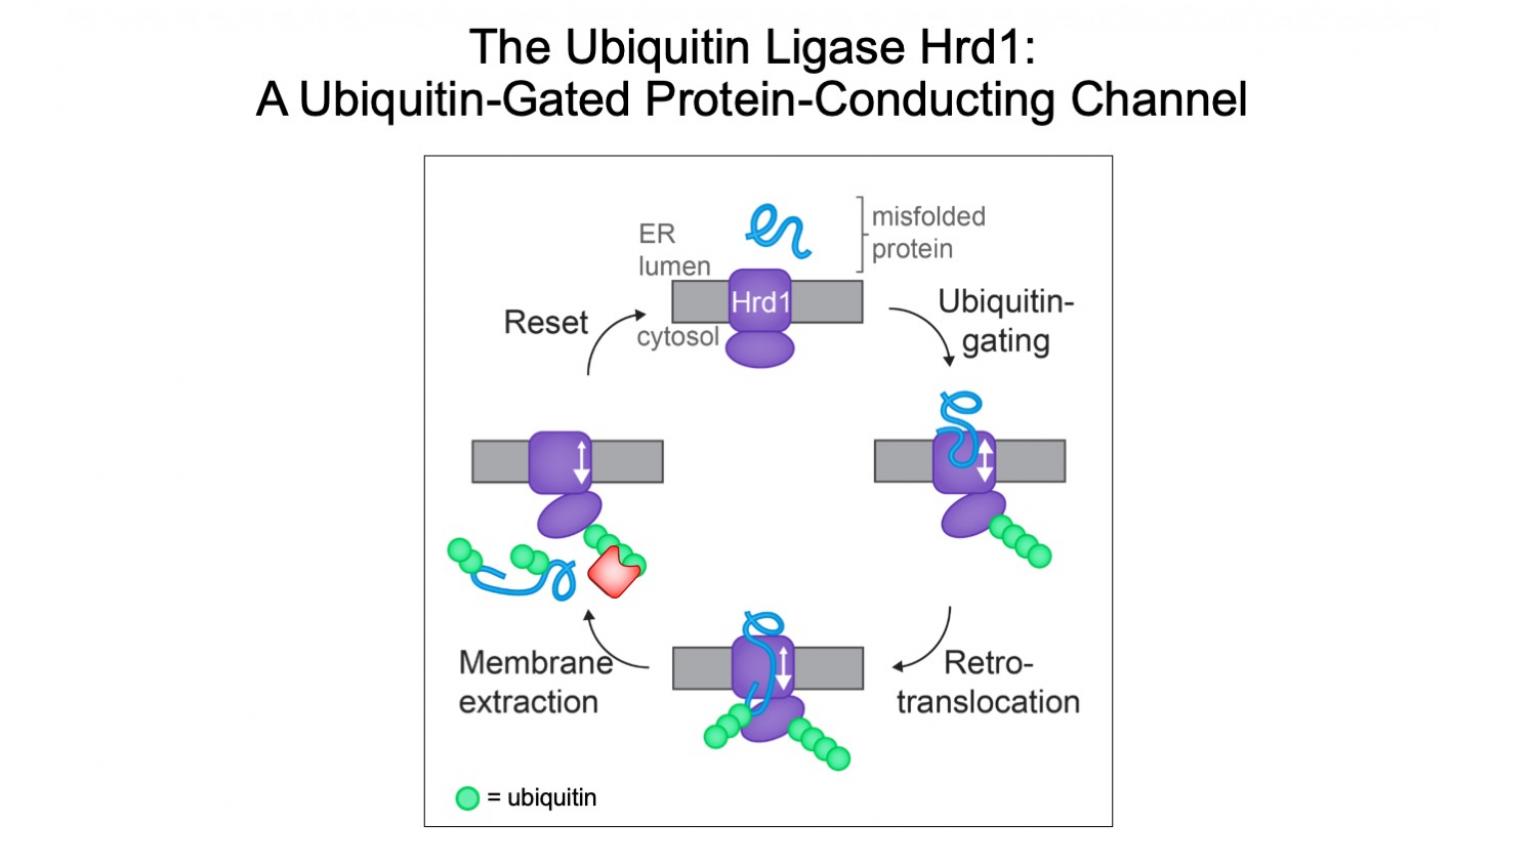 Autoubiquitination of the Hrd1 Ligase Triggers Protein Retrotranslocation in ERAD.